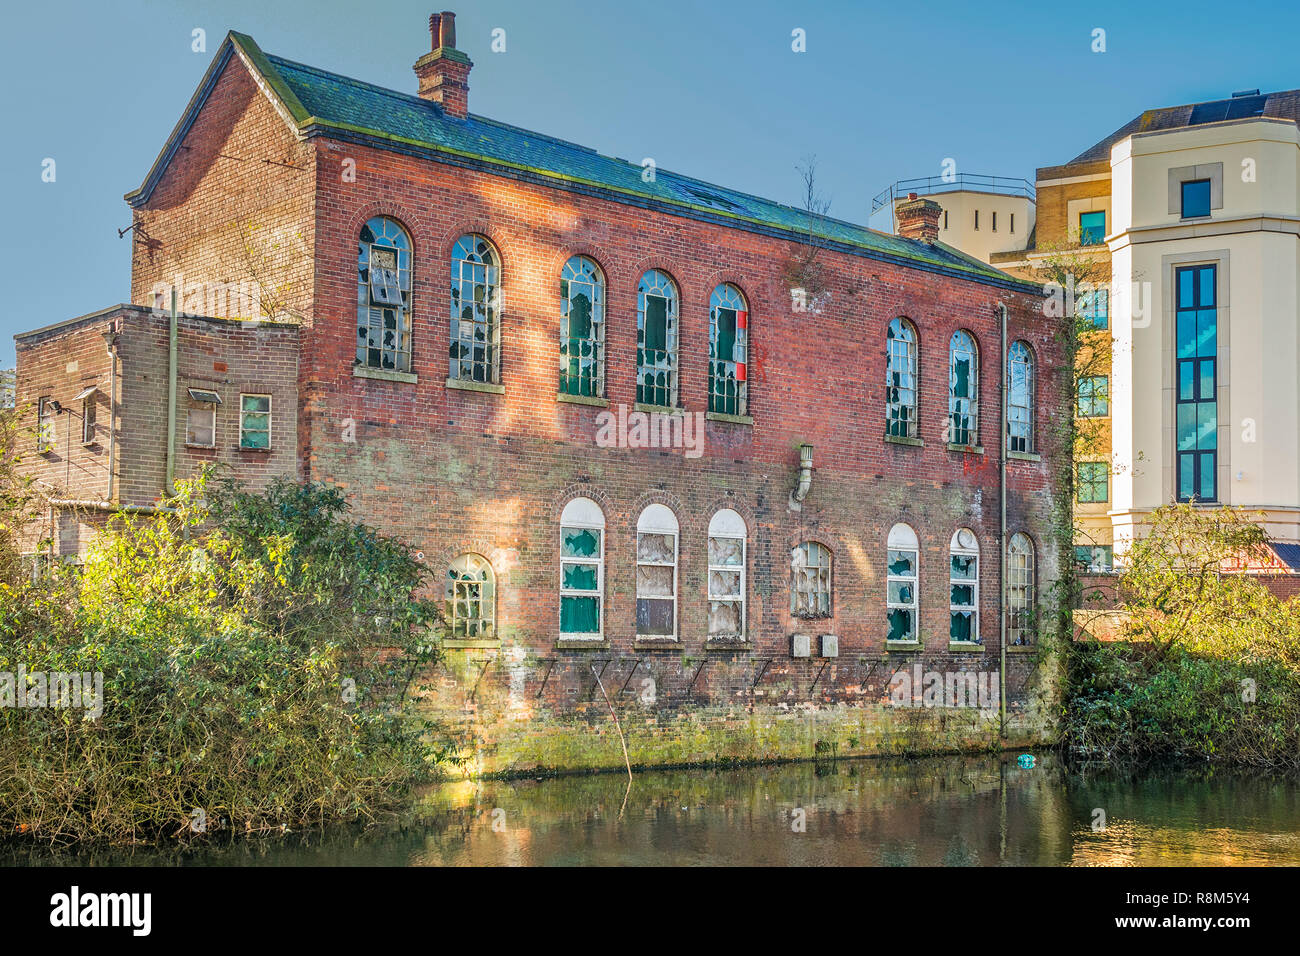 Abandoned Building, Kennet and Avon Canal, Reading, Berkshire, UK Stock Photo